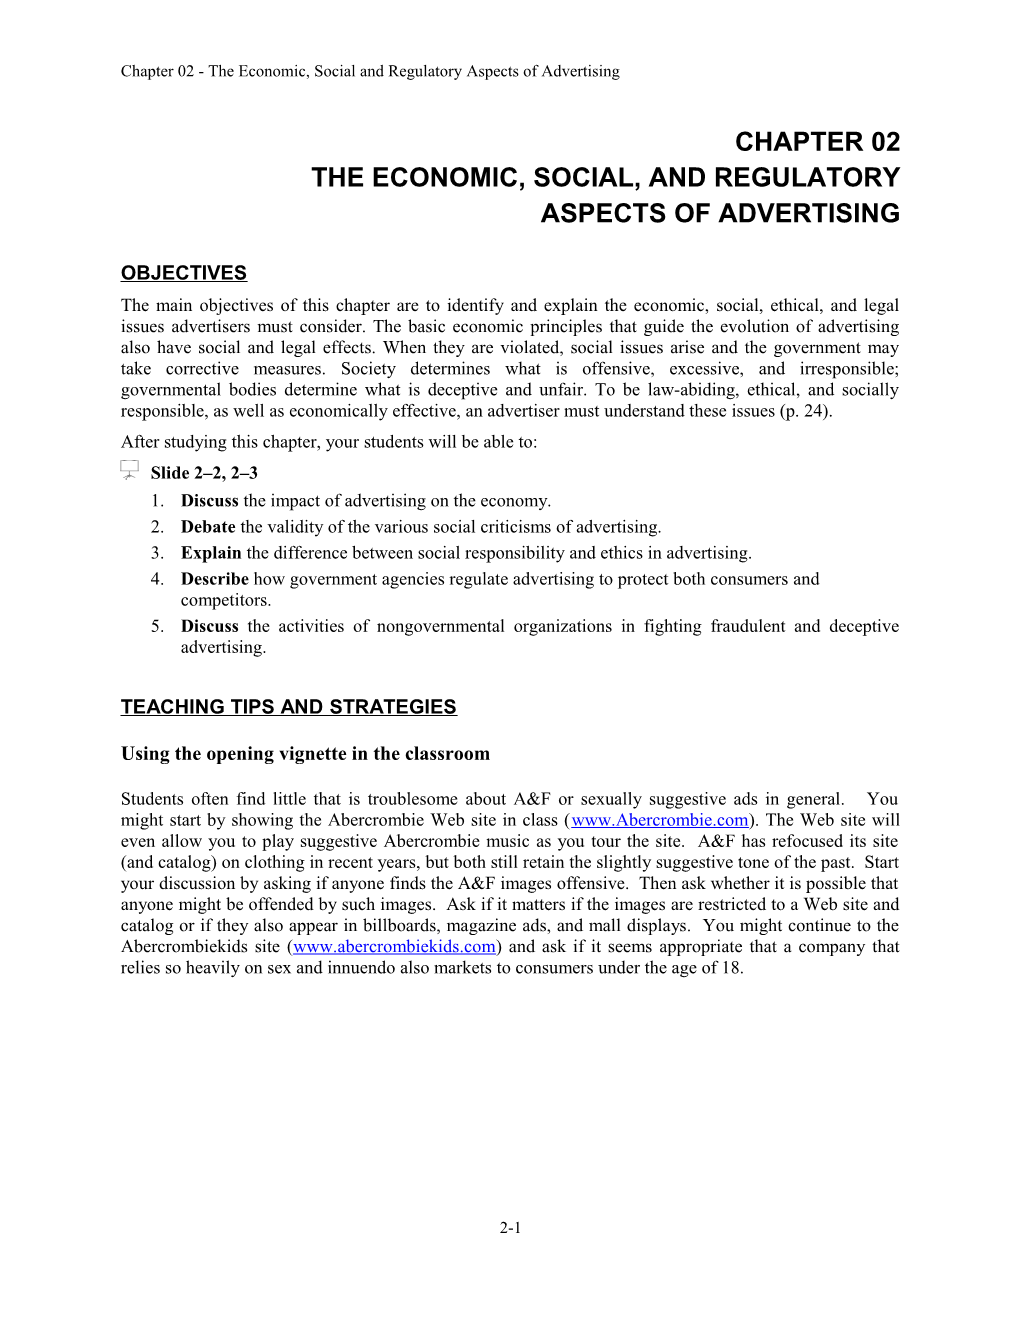 Chapter 02 - the Economic, Social and Regulatory Aspects of Advertising